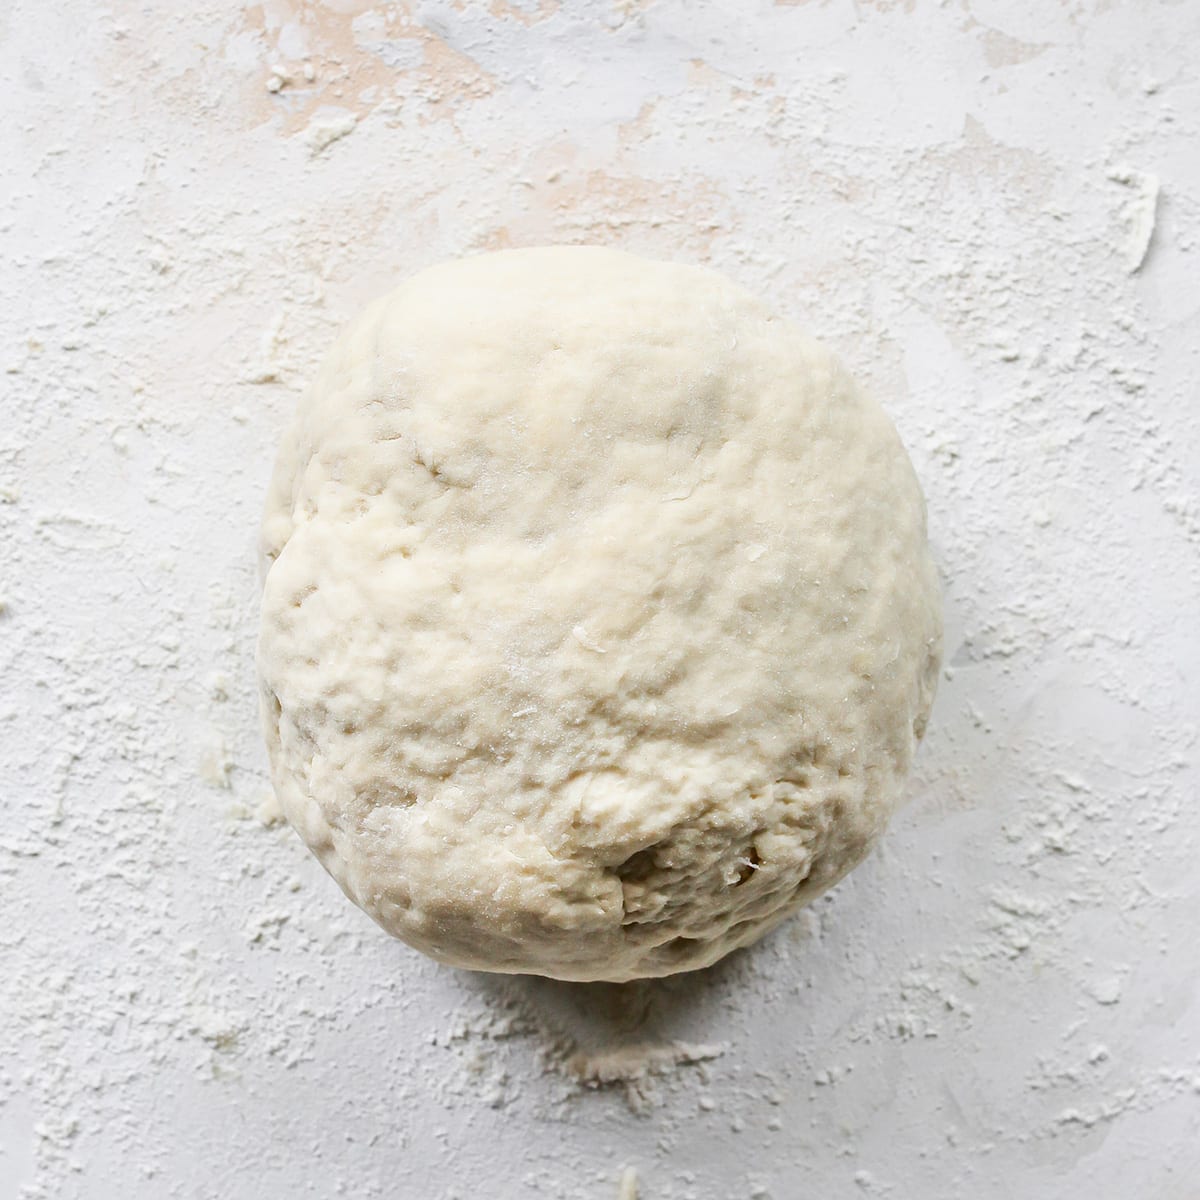 How to Make Naan Bread, dough kneaded into a round ball